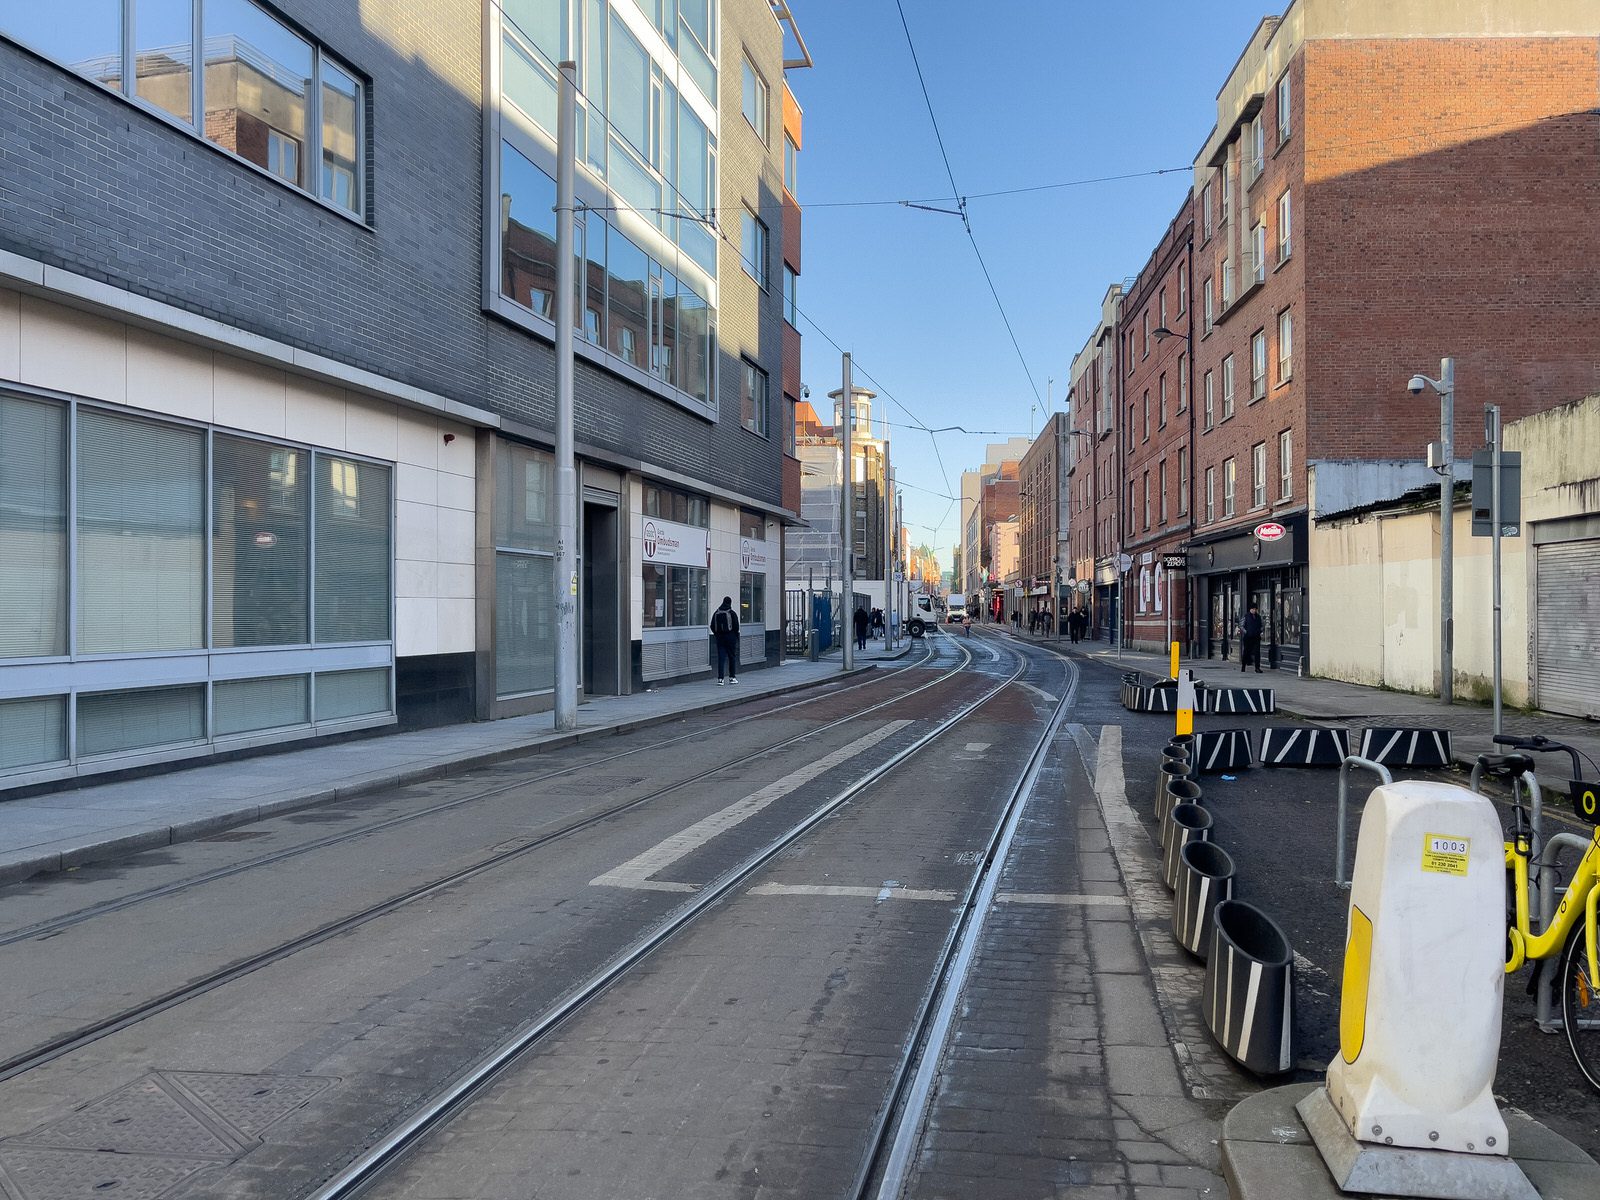 THE NEW STREET FURNITURE AND THE CHRISTMAS TREE [HAVE ARRIVED IN CAPEL STREET]-225870-1